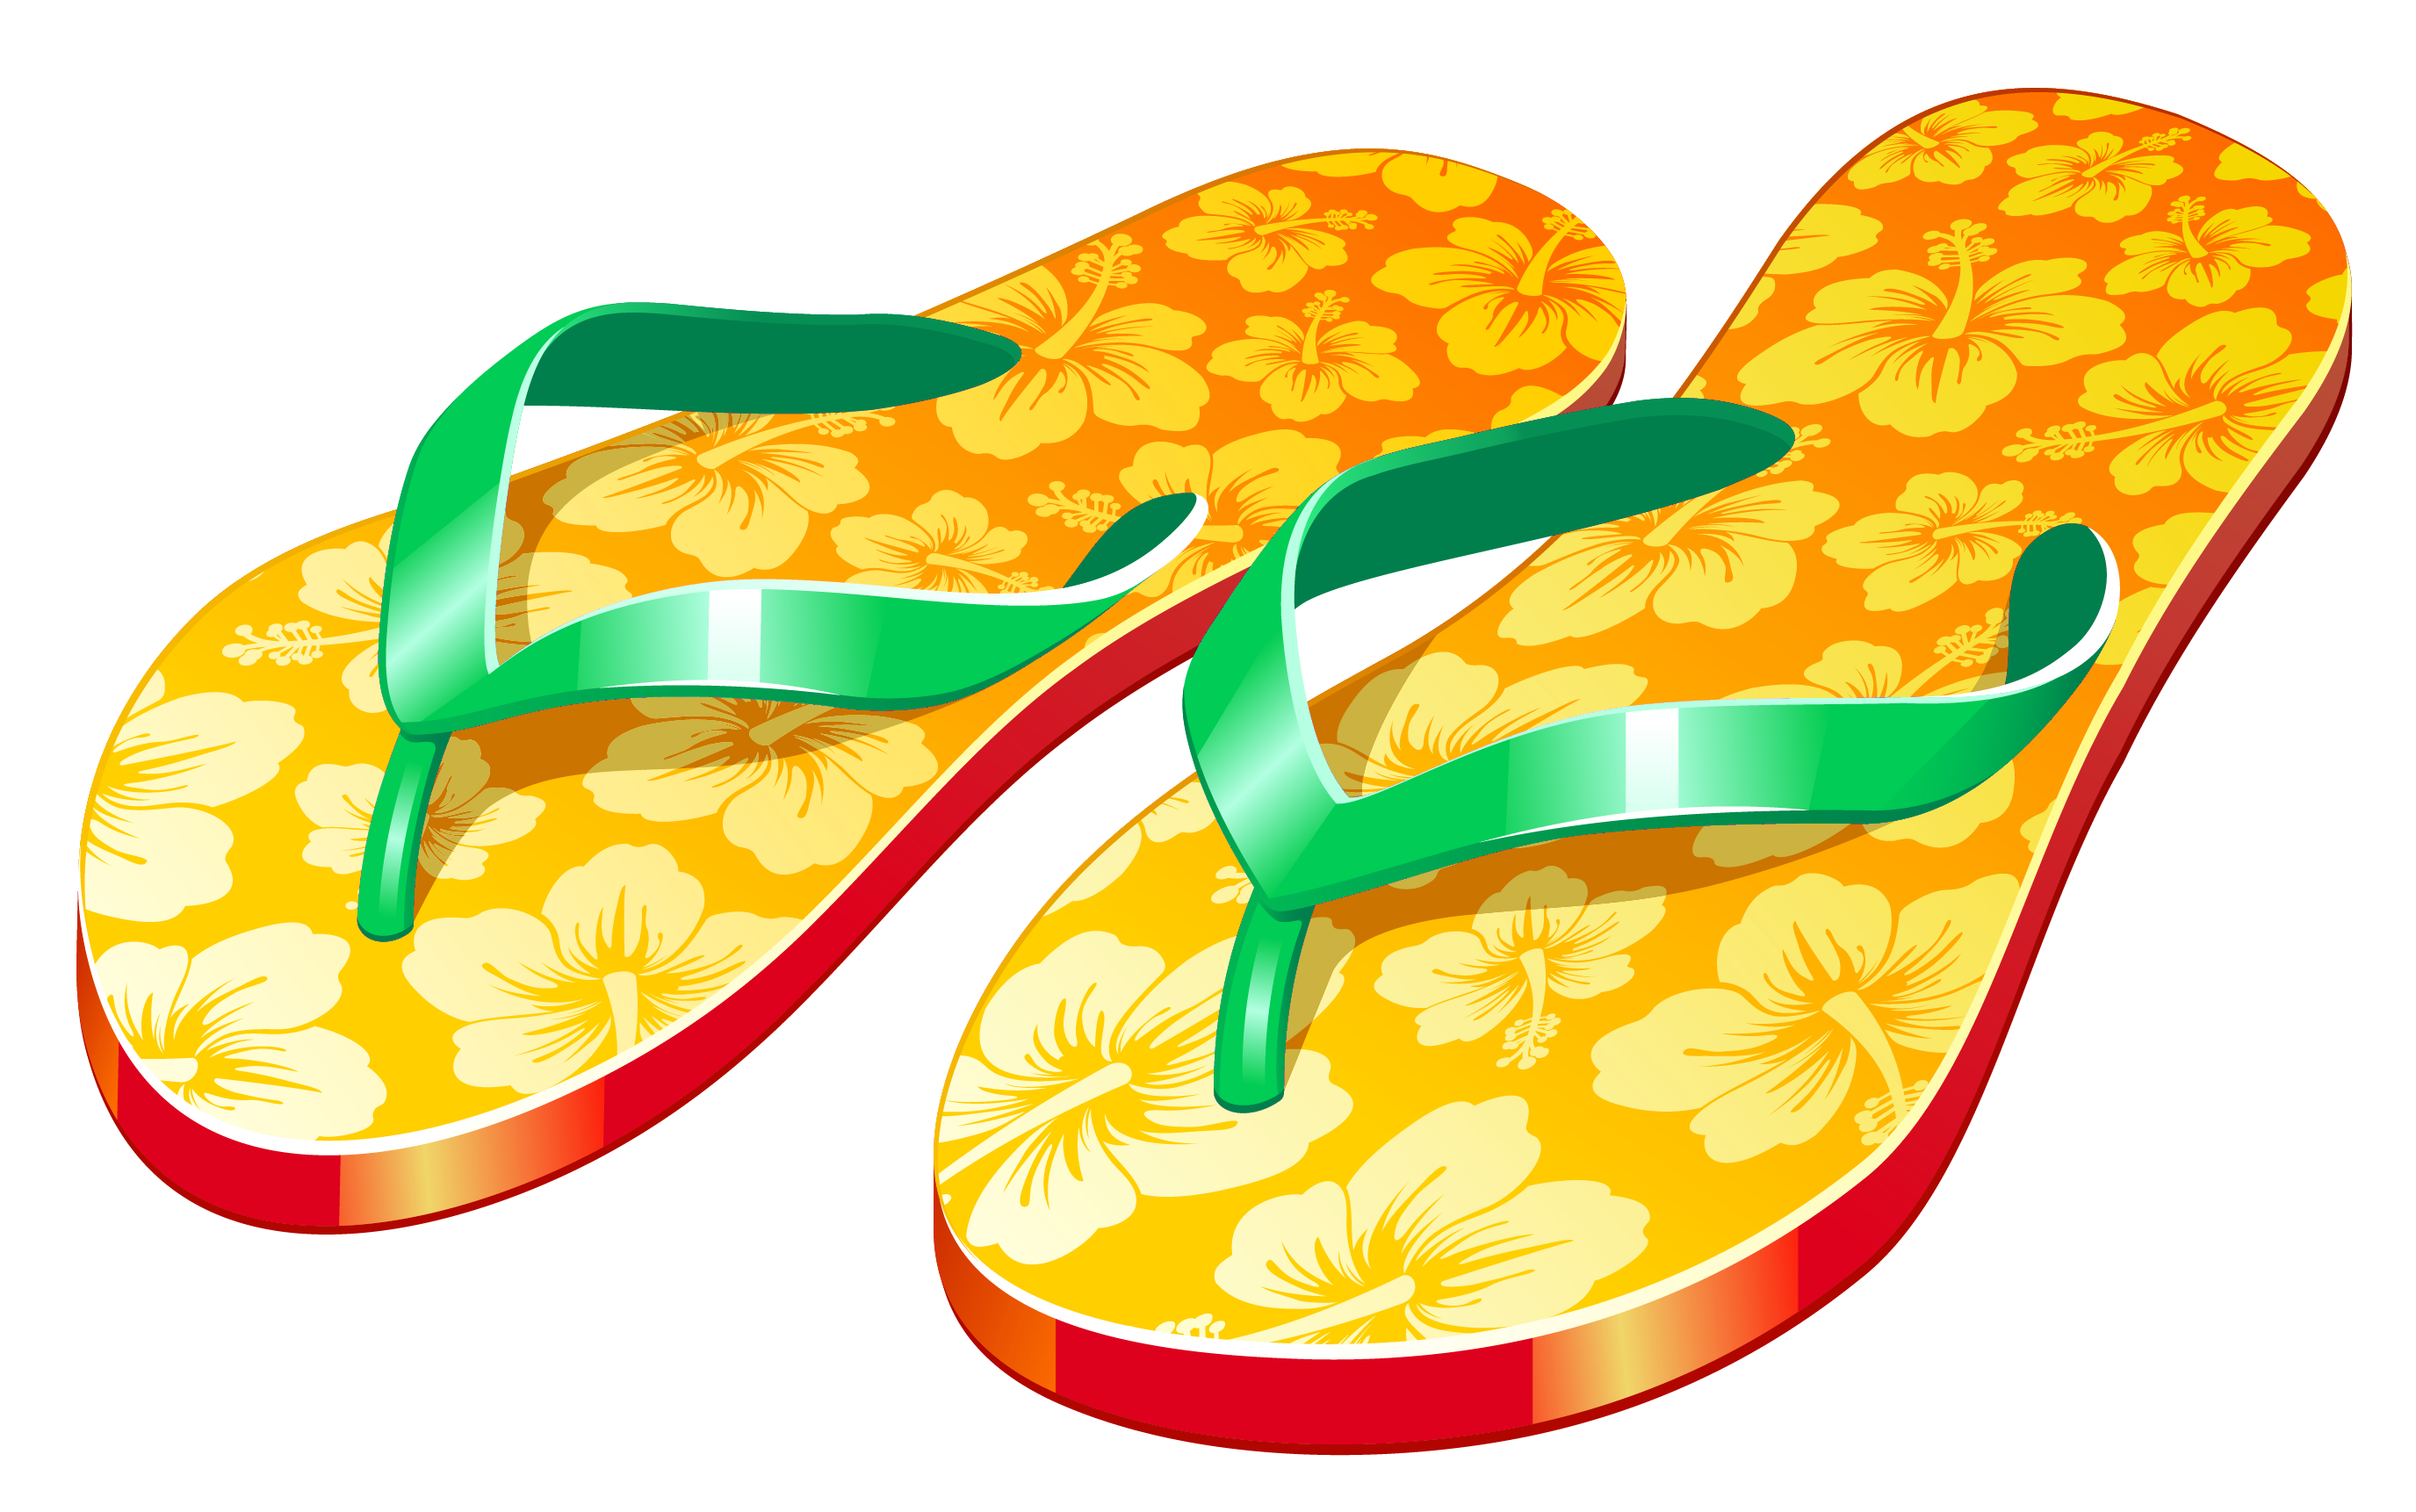 Clothes on emaze. Green clipart flip flop